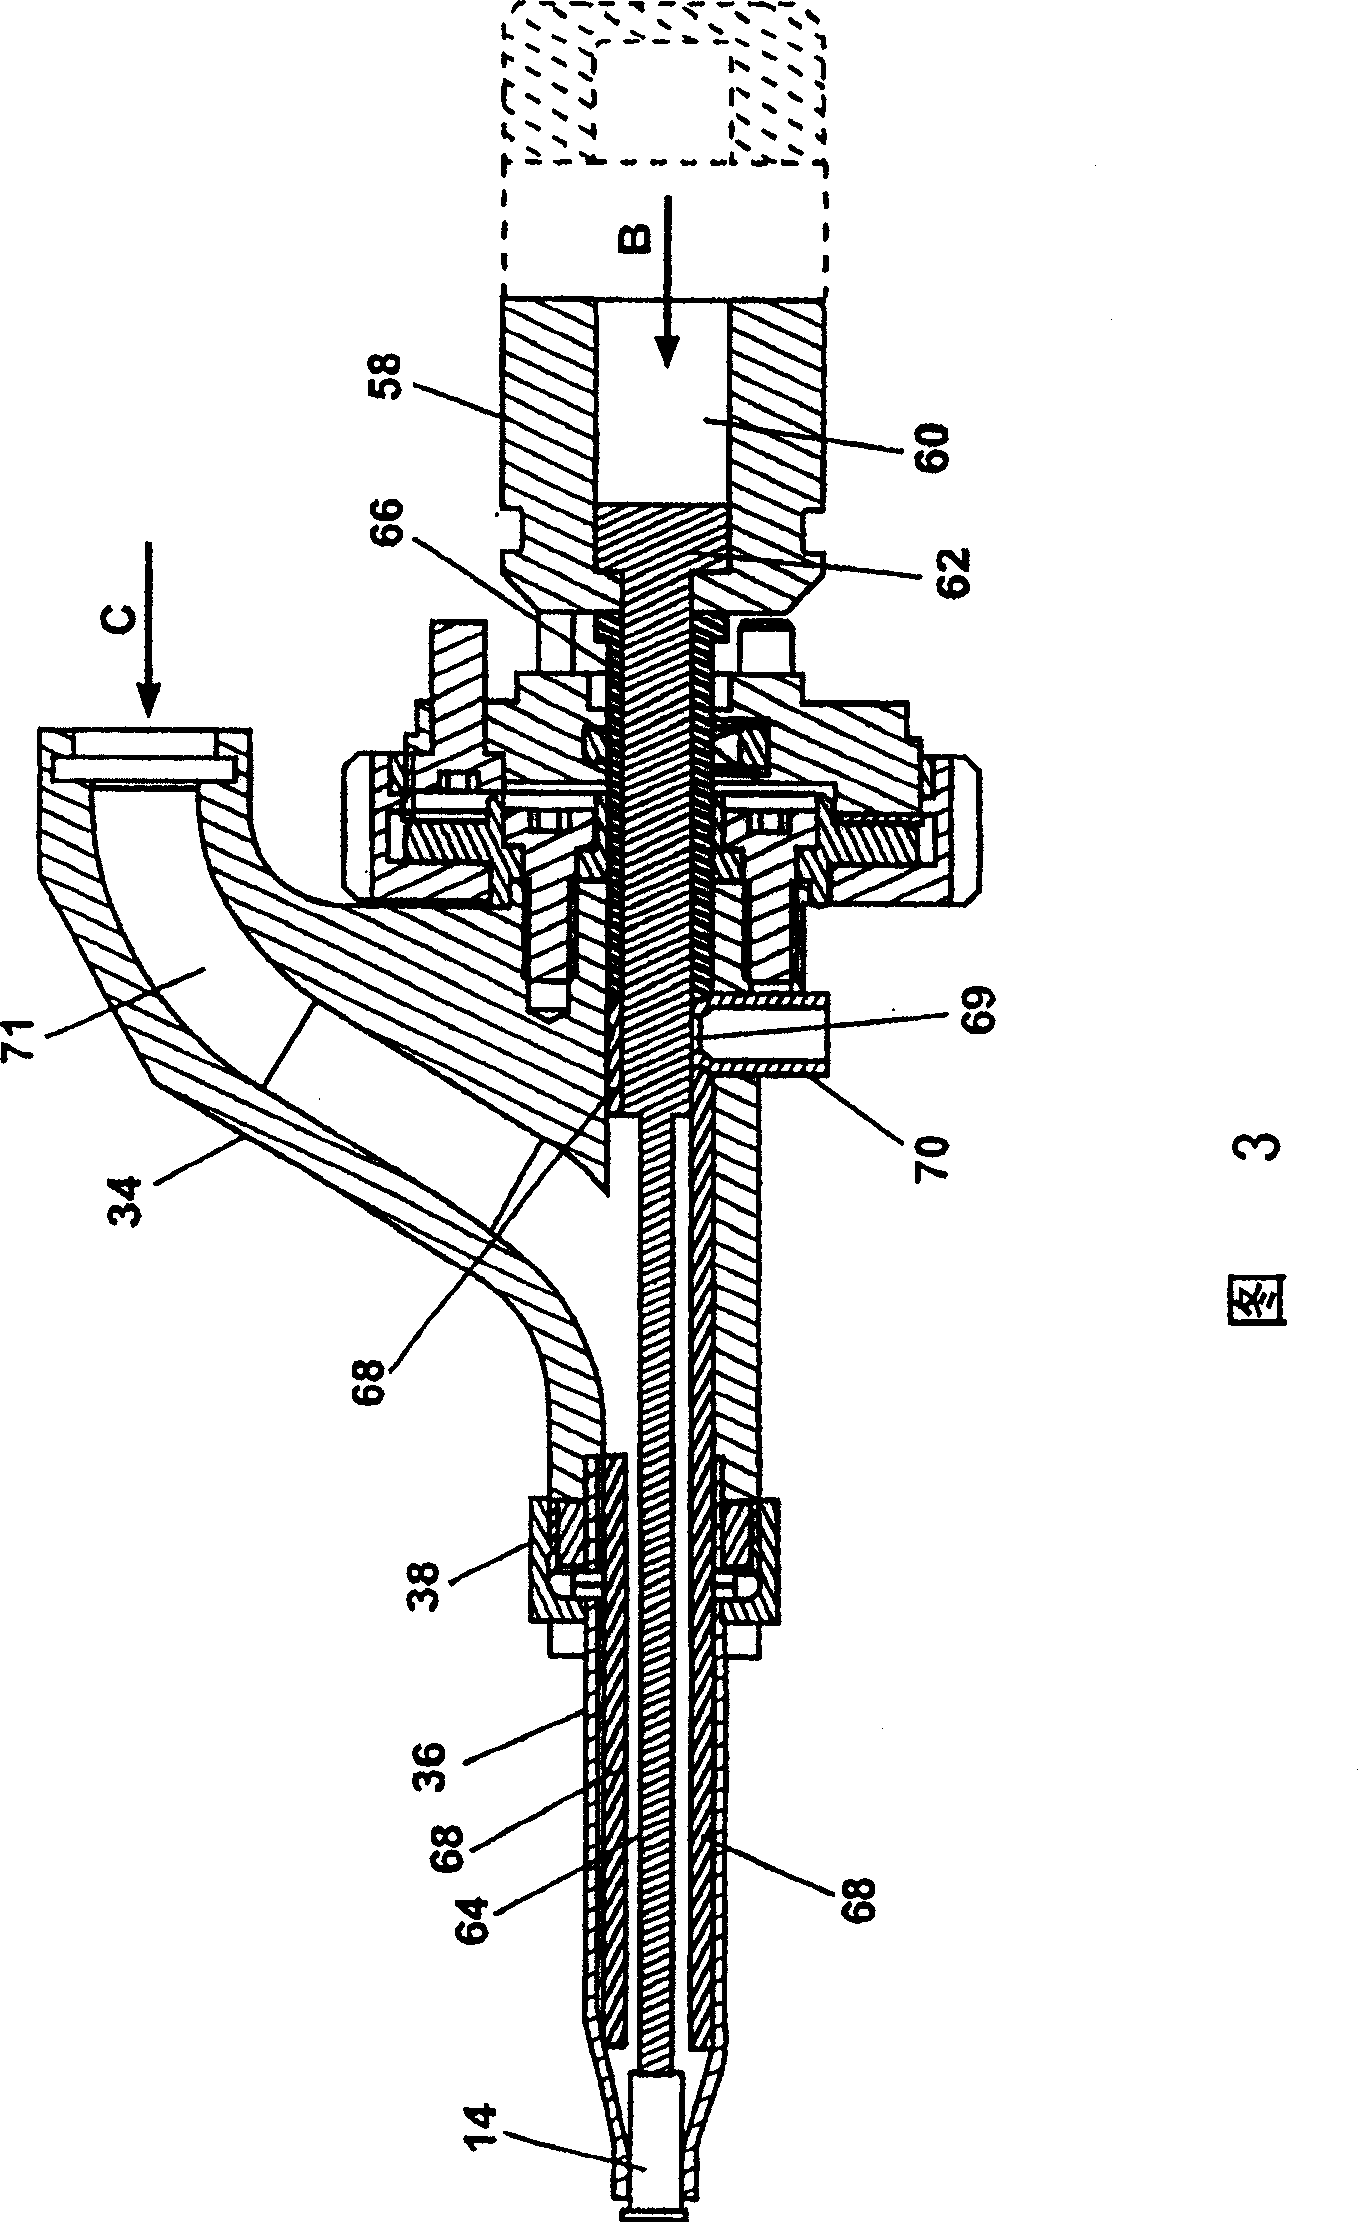 Workpiece attachment part delivery system, stud detection circuit and method for operating welding gun